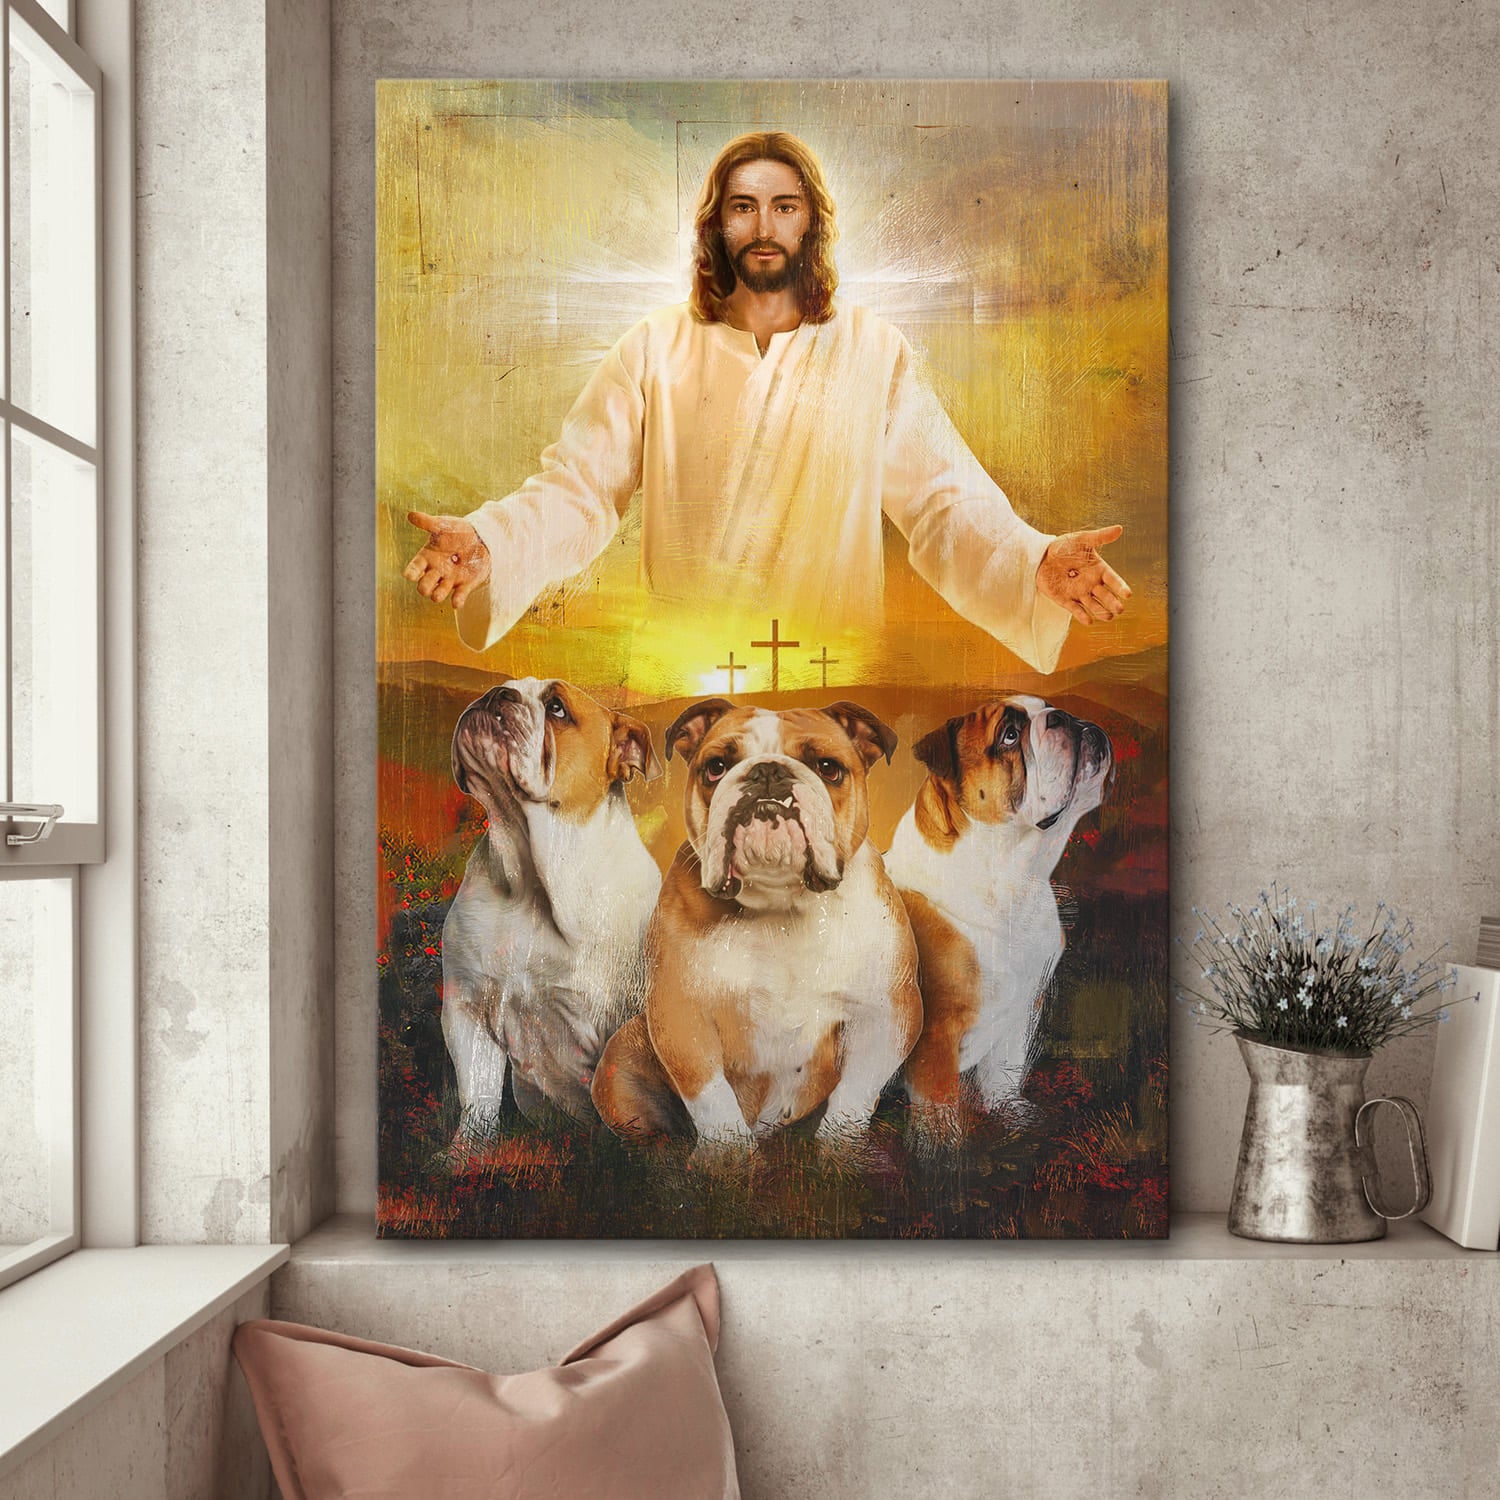 Bulldog - In the arms of Jesus - Dog Portrait Canvas Print - Wall Art